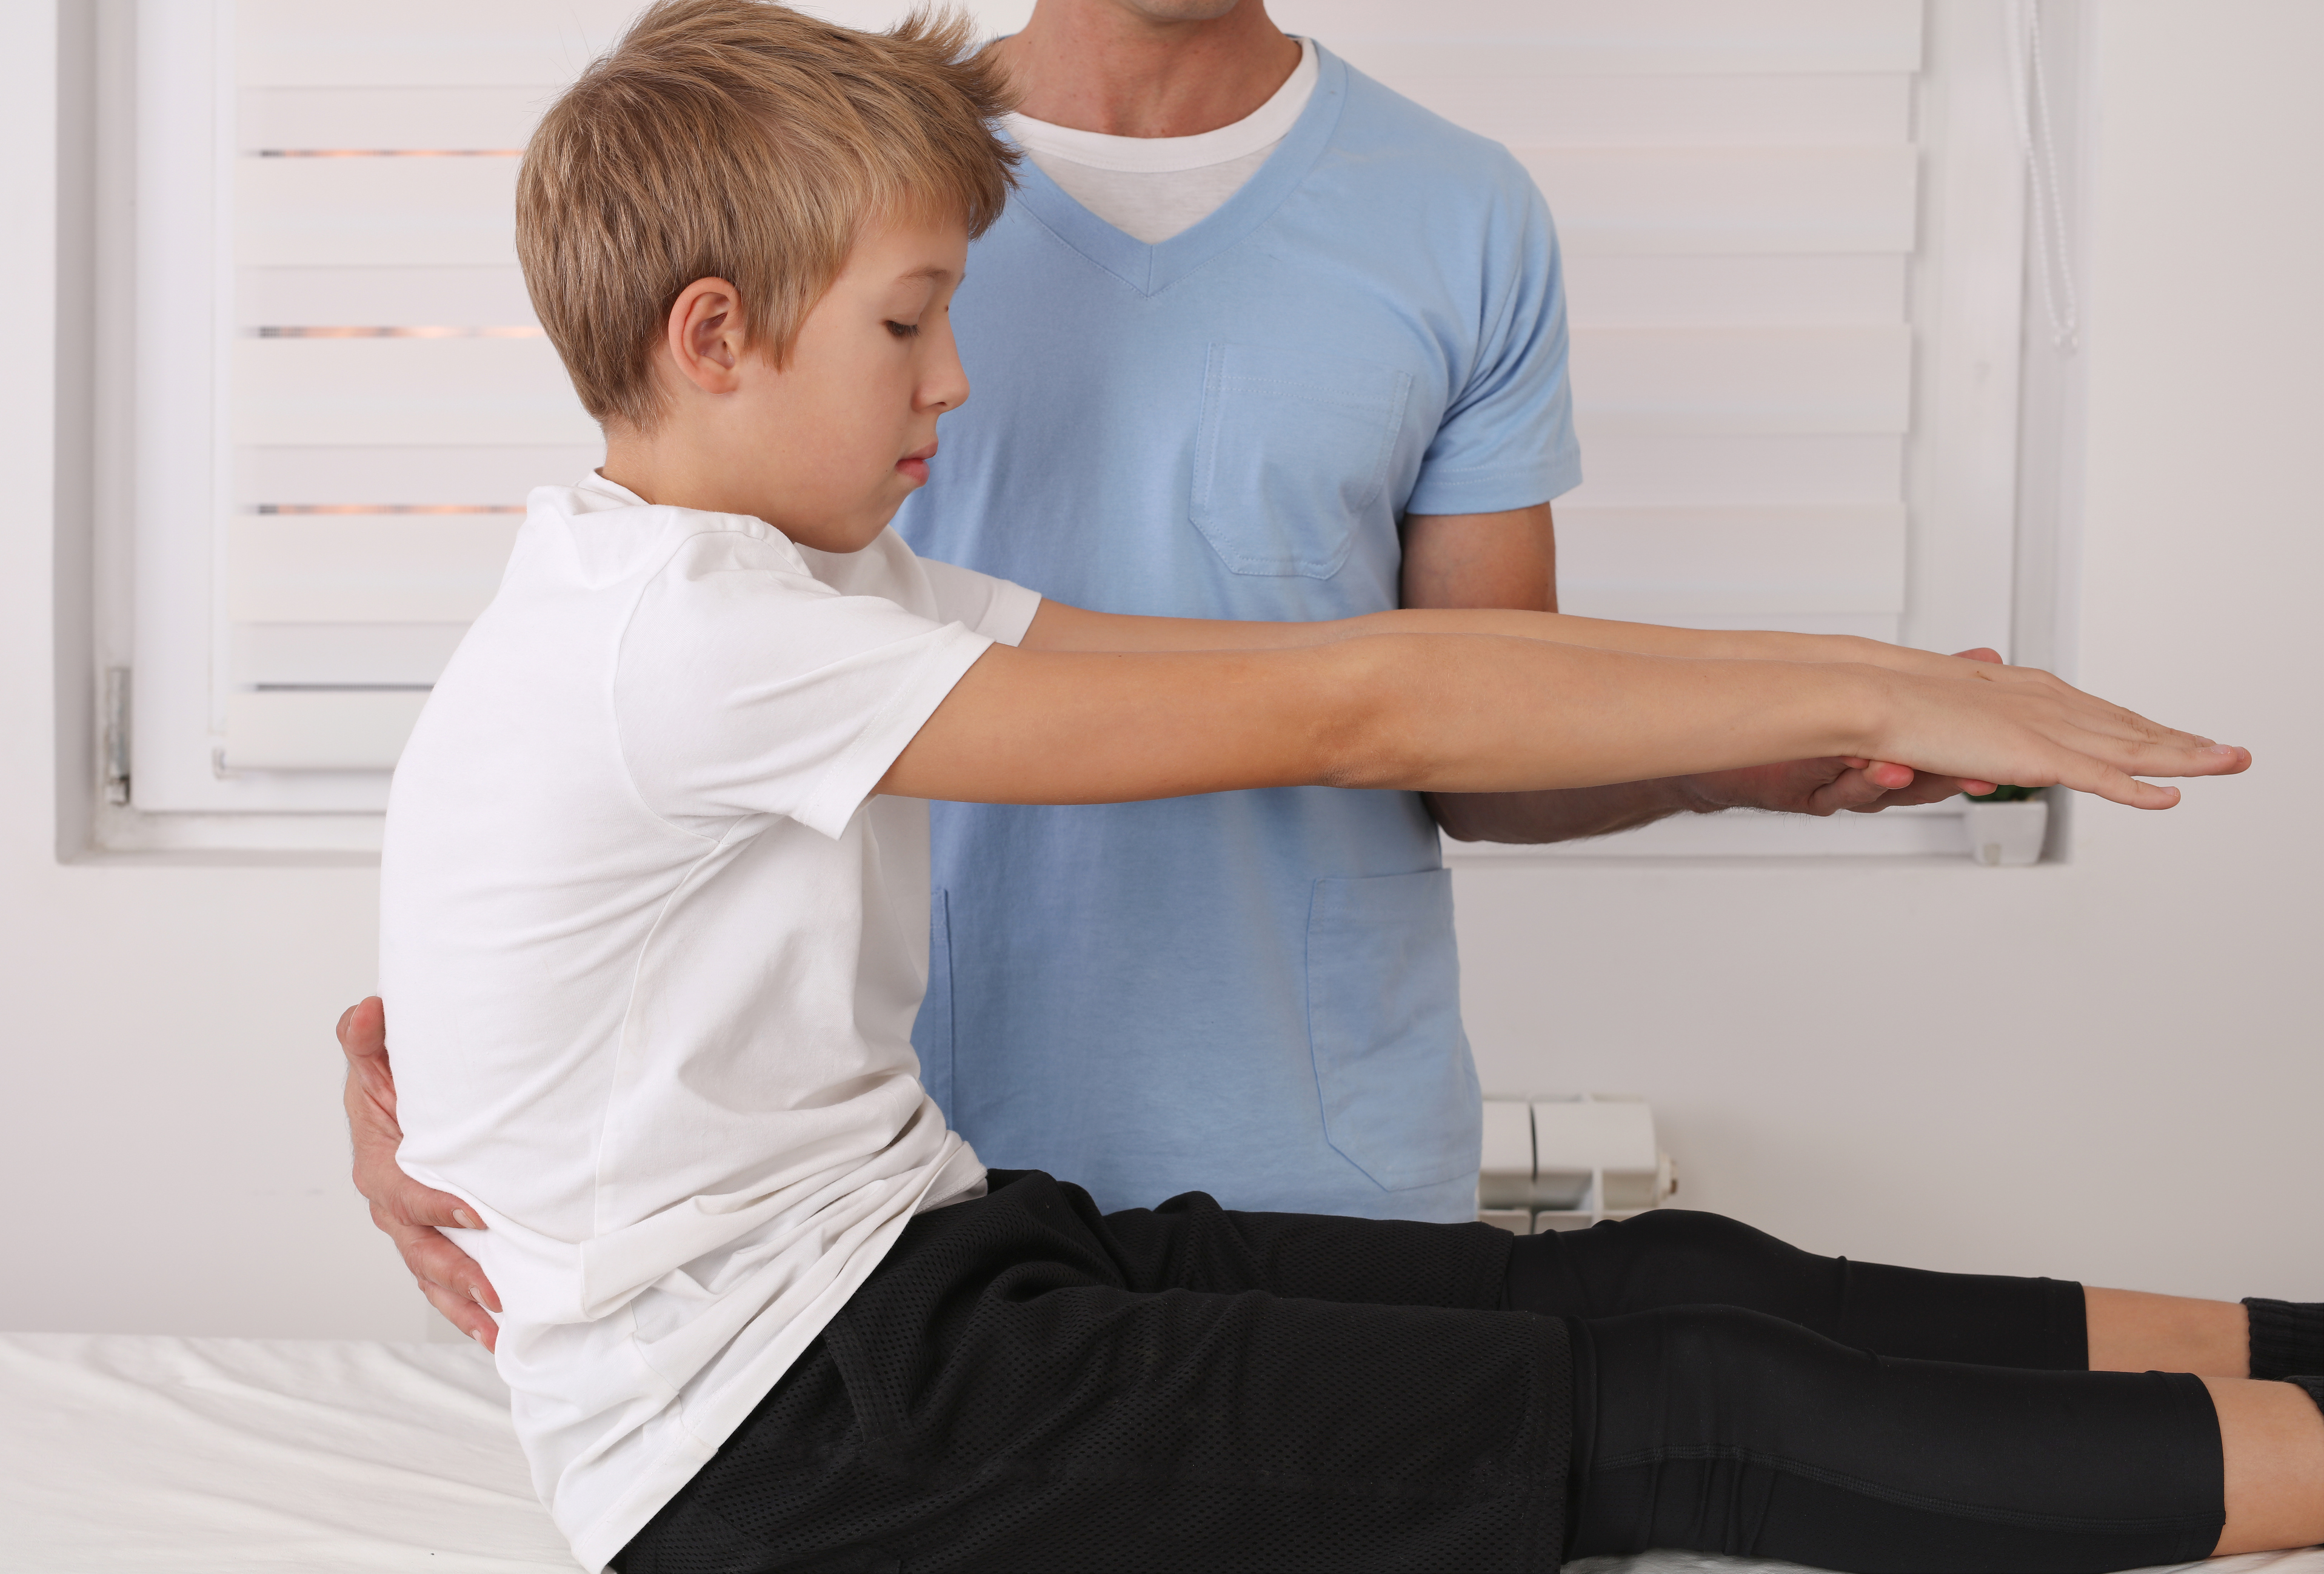 Advanced Seated Exercises – Adult and pediatric printable